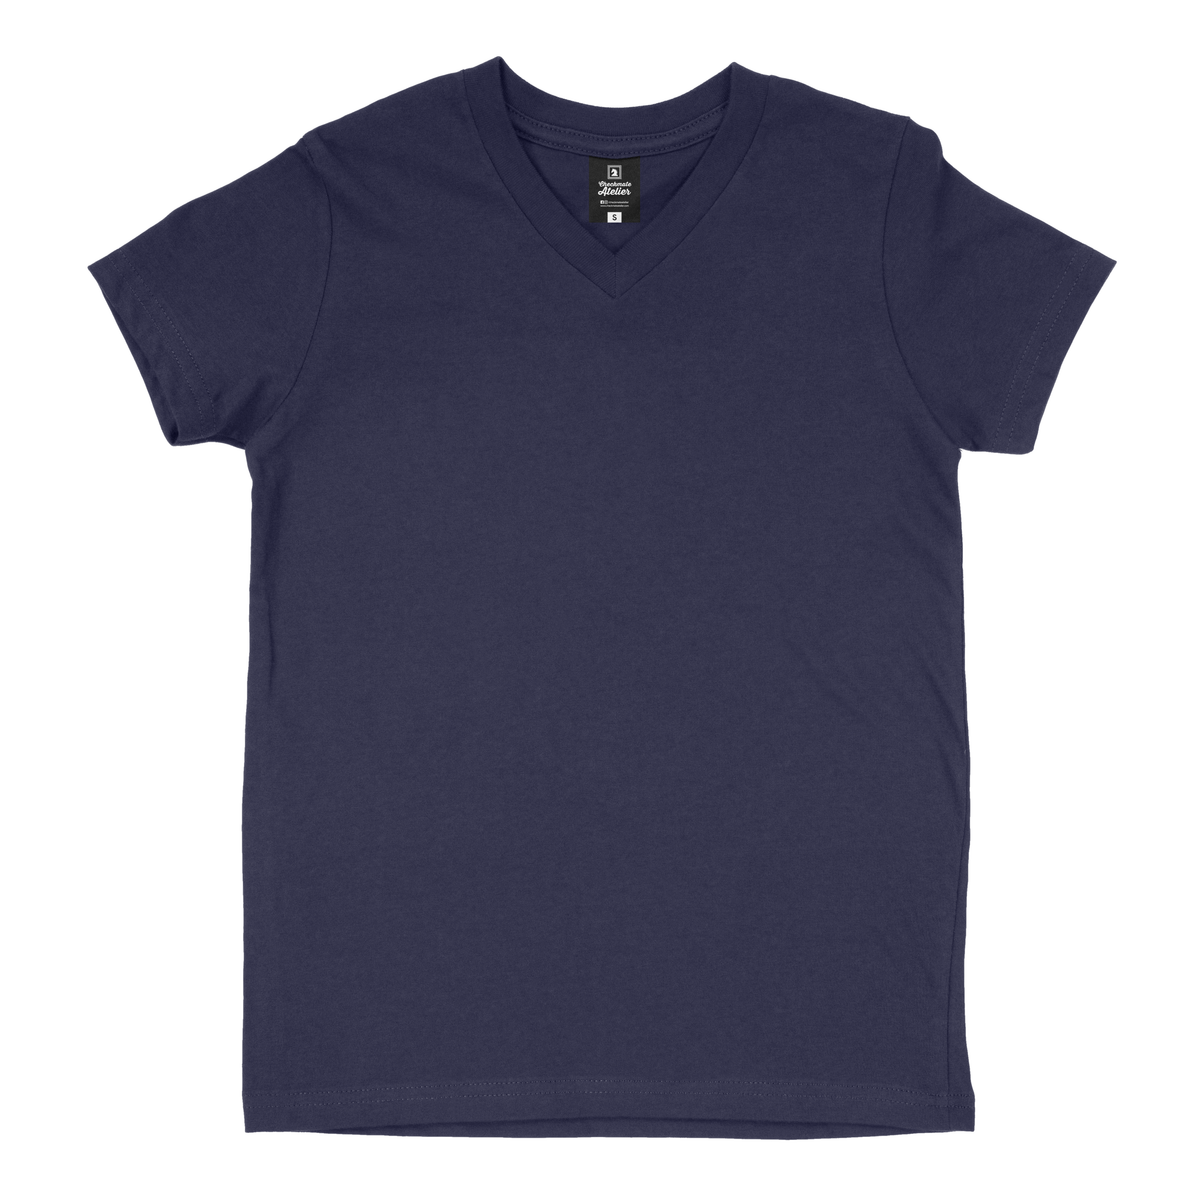 Navy Blue V-Neck T-Shirt - Shop Now - Checkmate Atelier